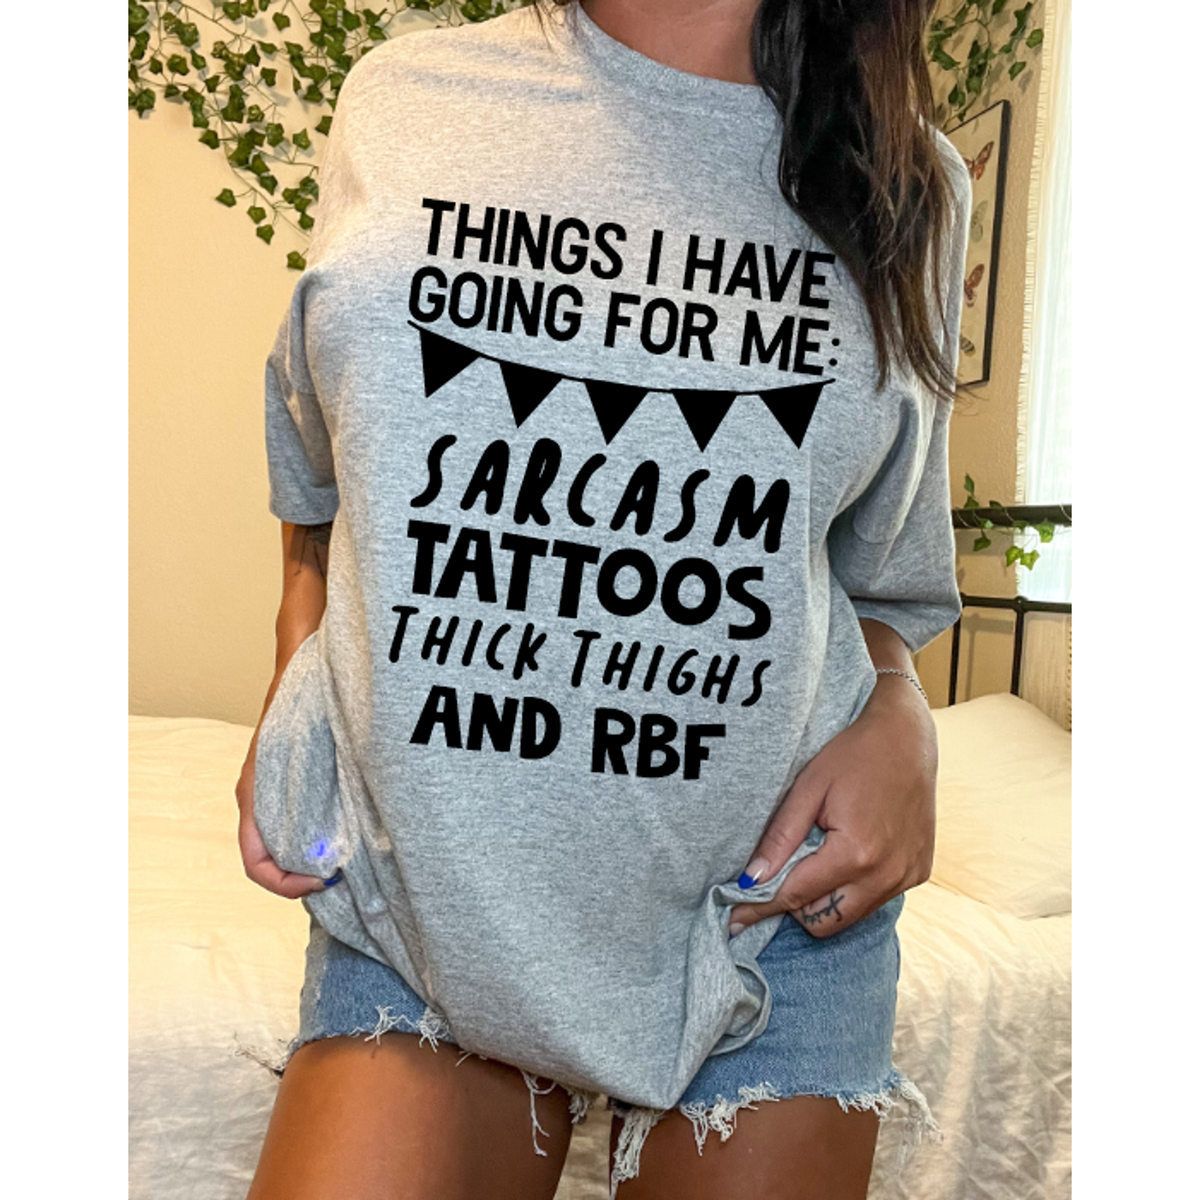 Things I have going for Me Tee or Sweatshirt